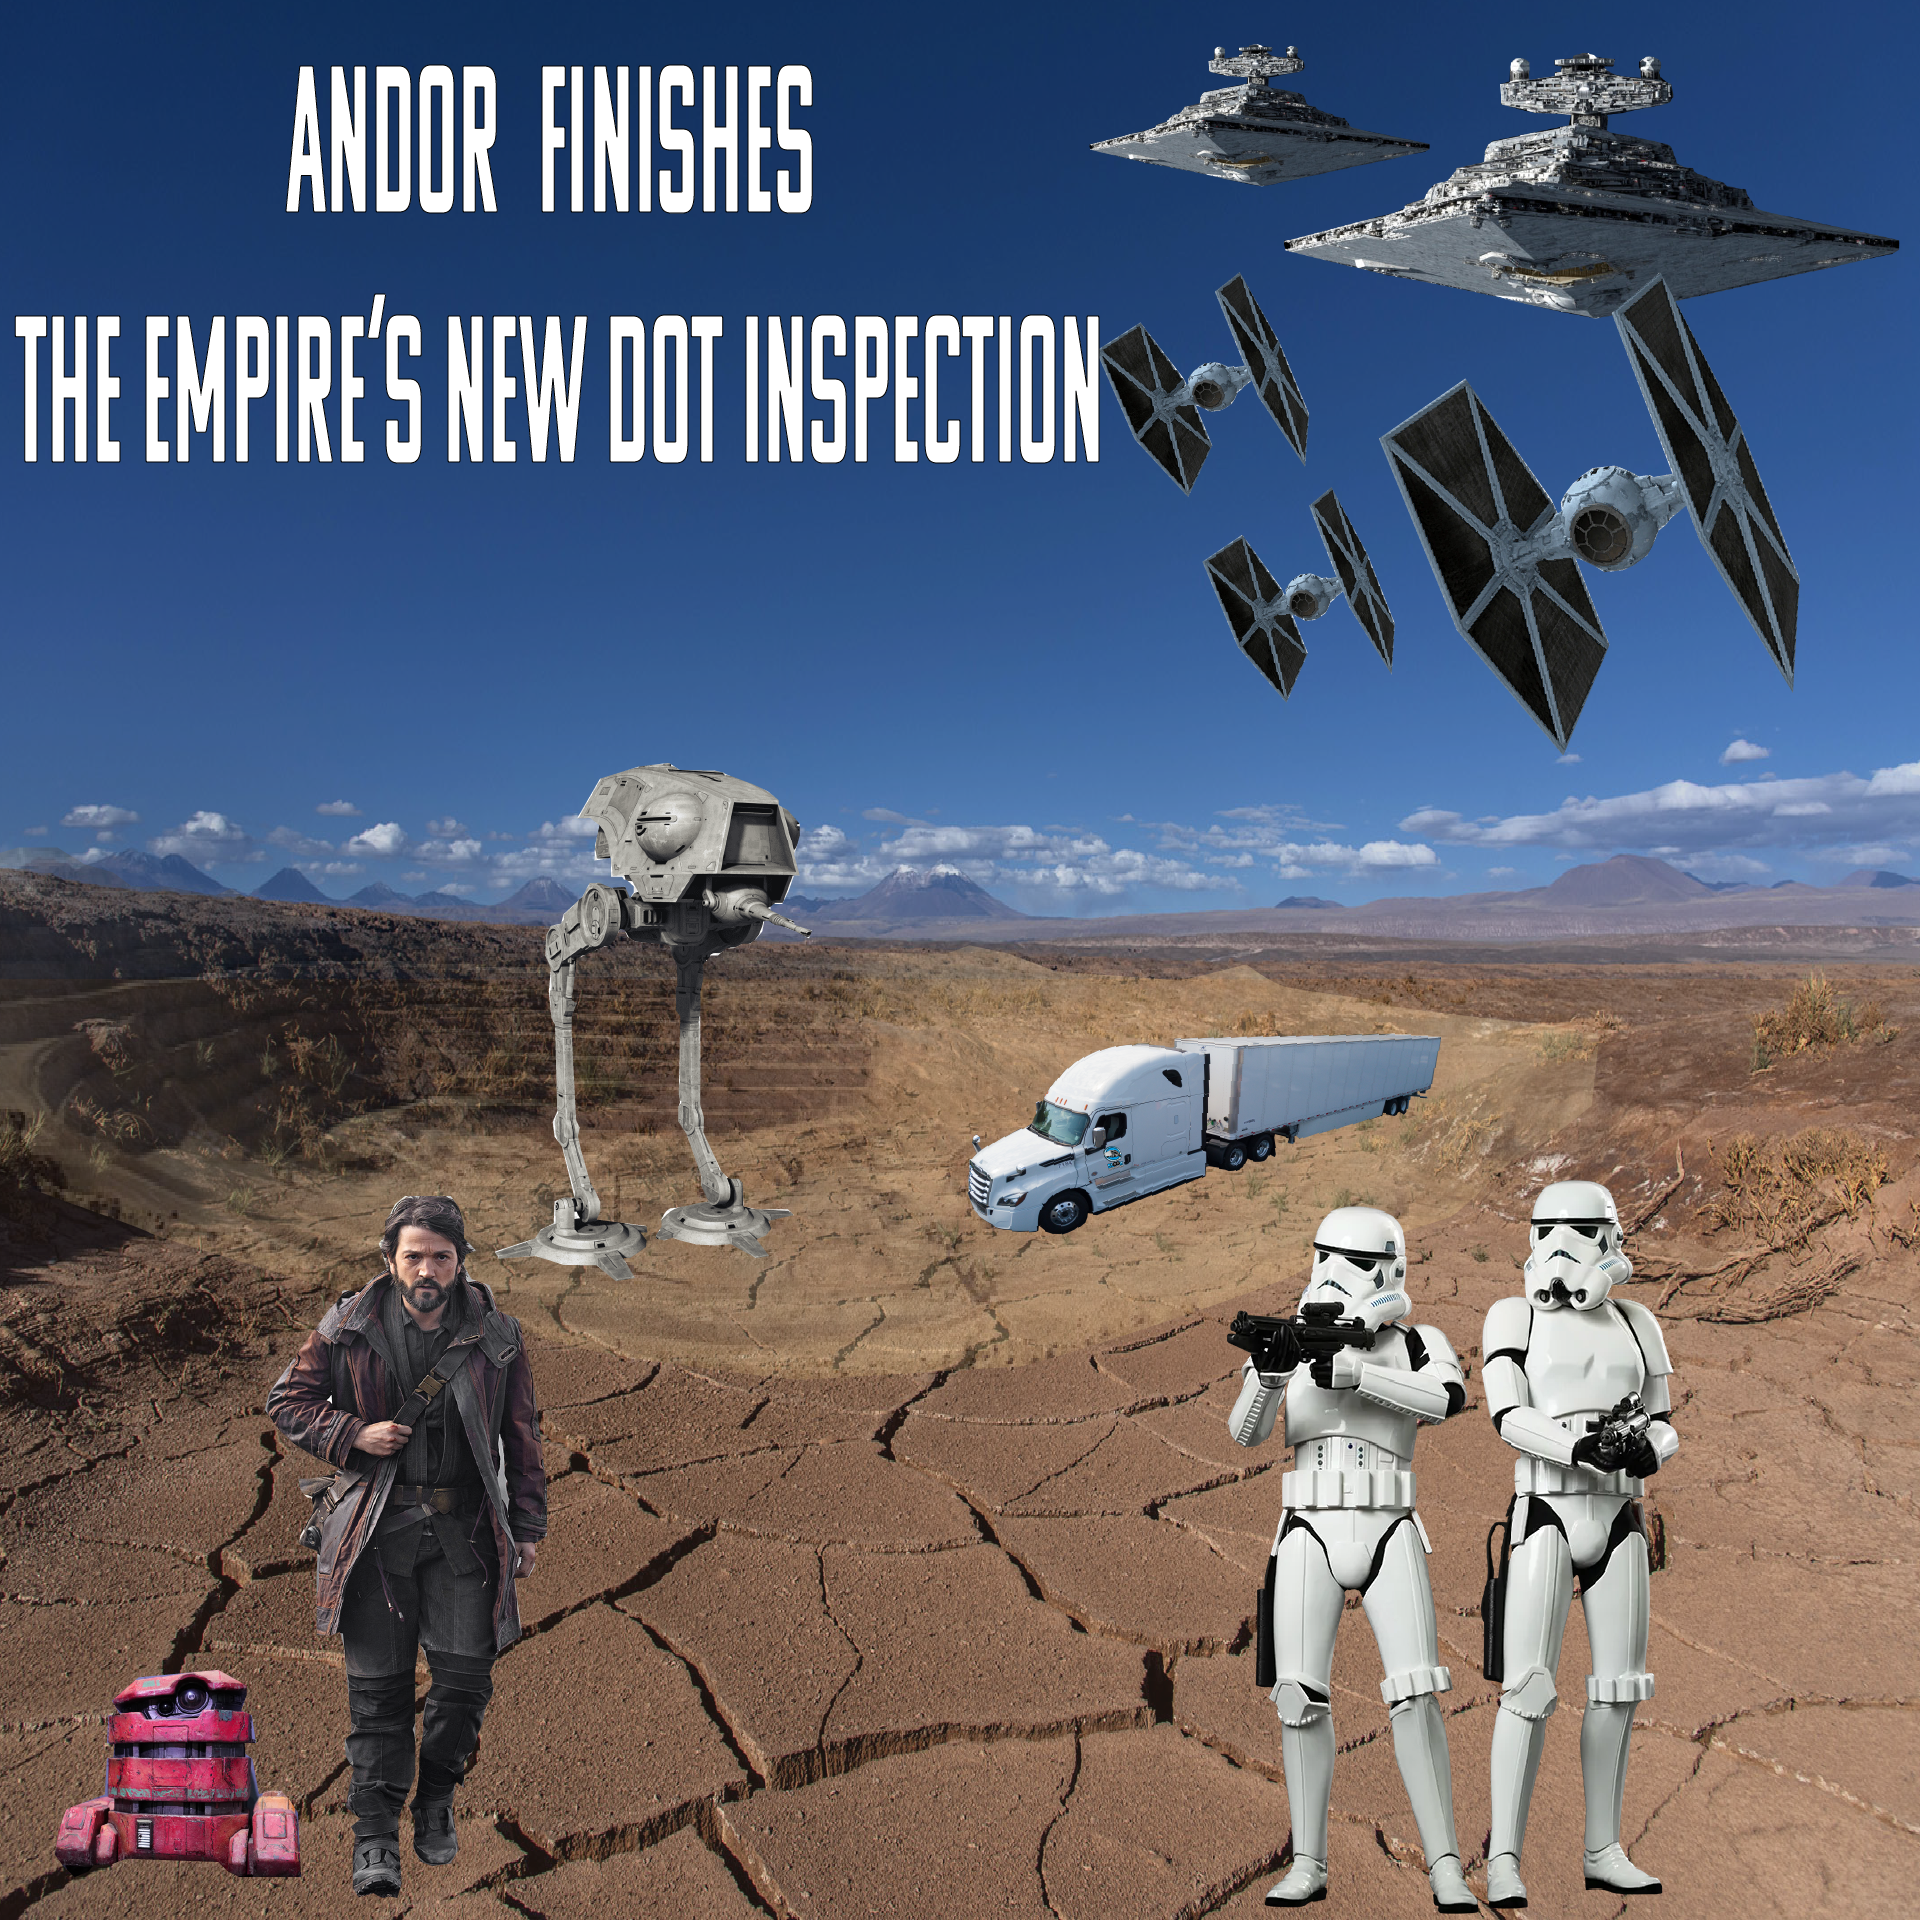 a poster for andor finishes the empire 's new dot inspection